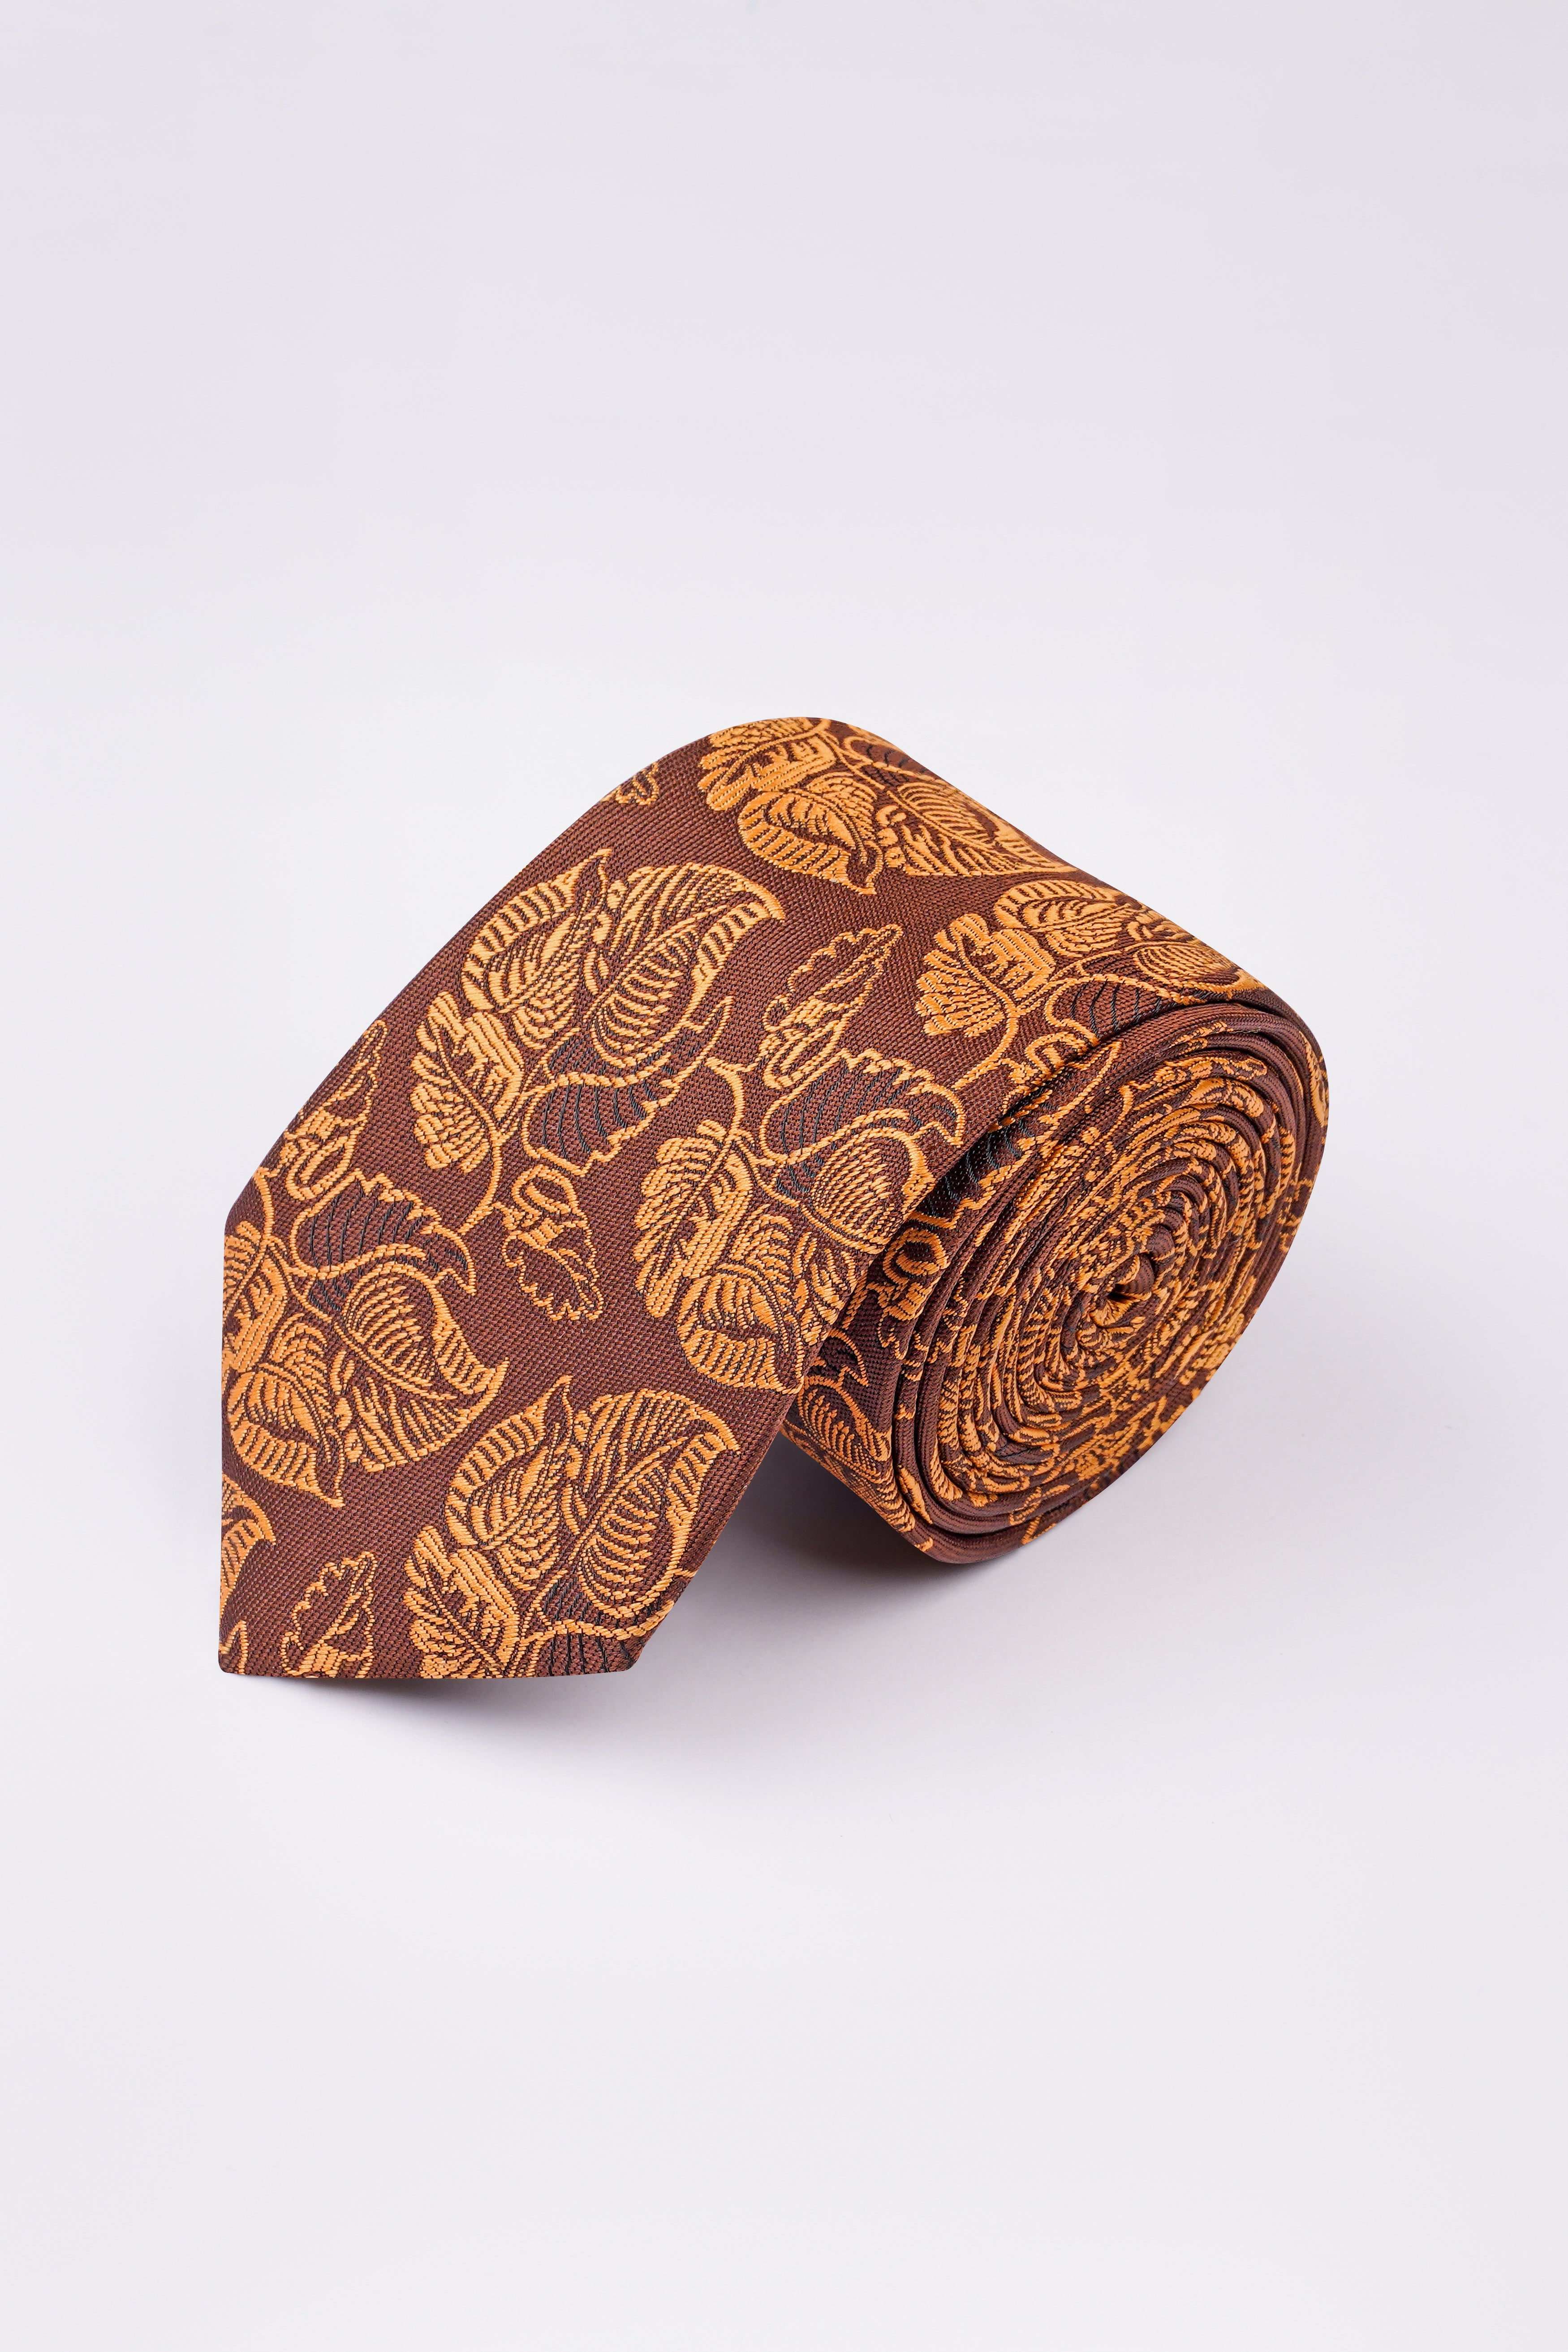 Matrix Brown with Chardonnay Yellow Leaves Textured Jacquard Tie with Pocket Square  TP055